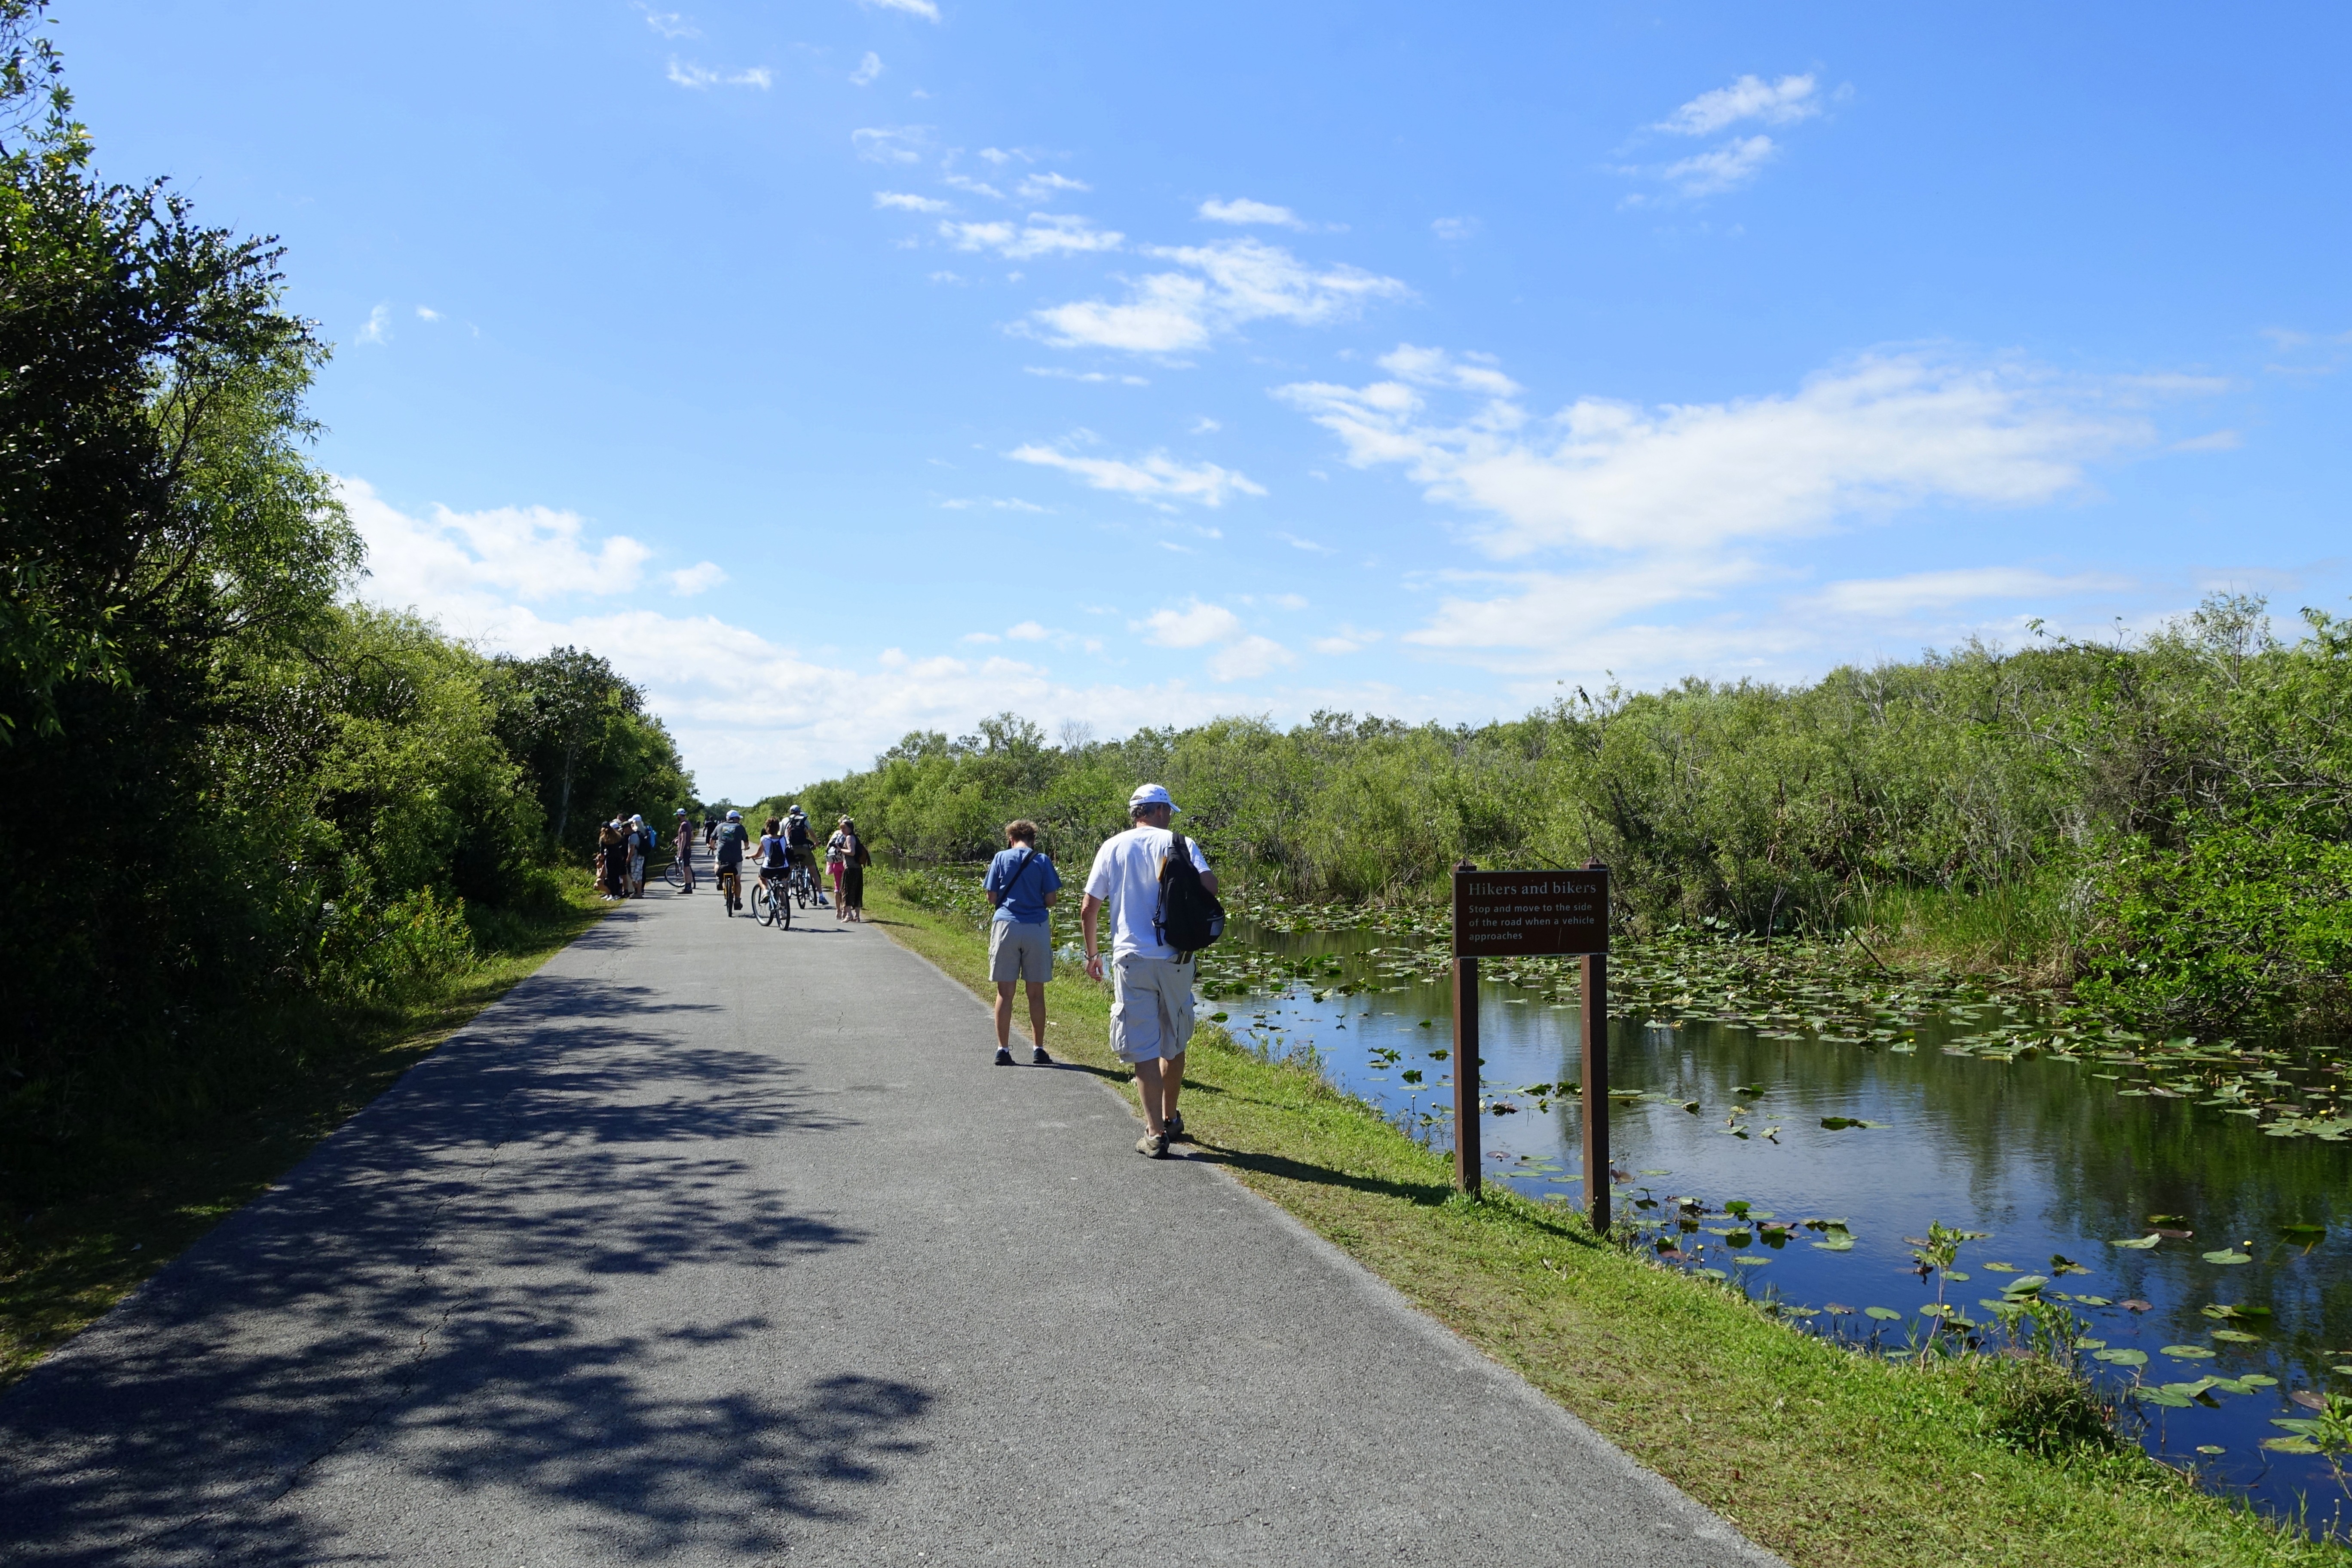 A wide paved e-bike path with pedestrians and bicyclists next to a marsh, lily pads, bushes, and trees below a bright blue sky